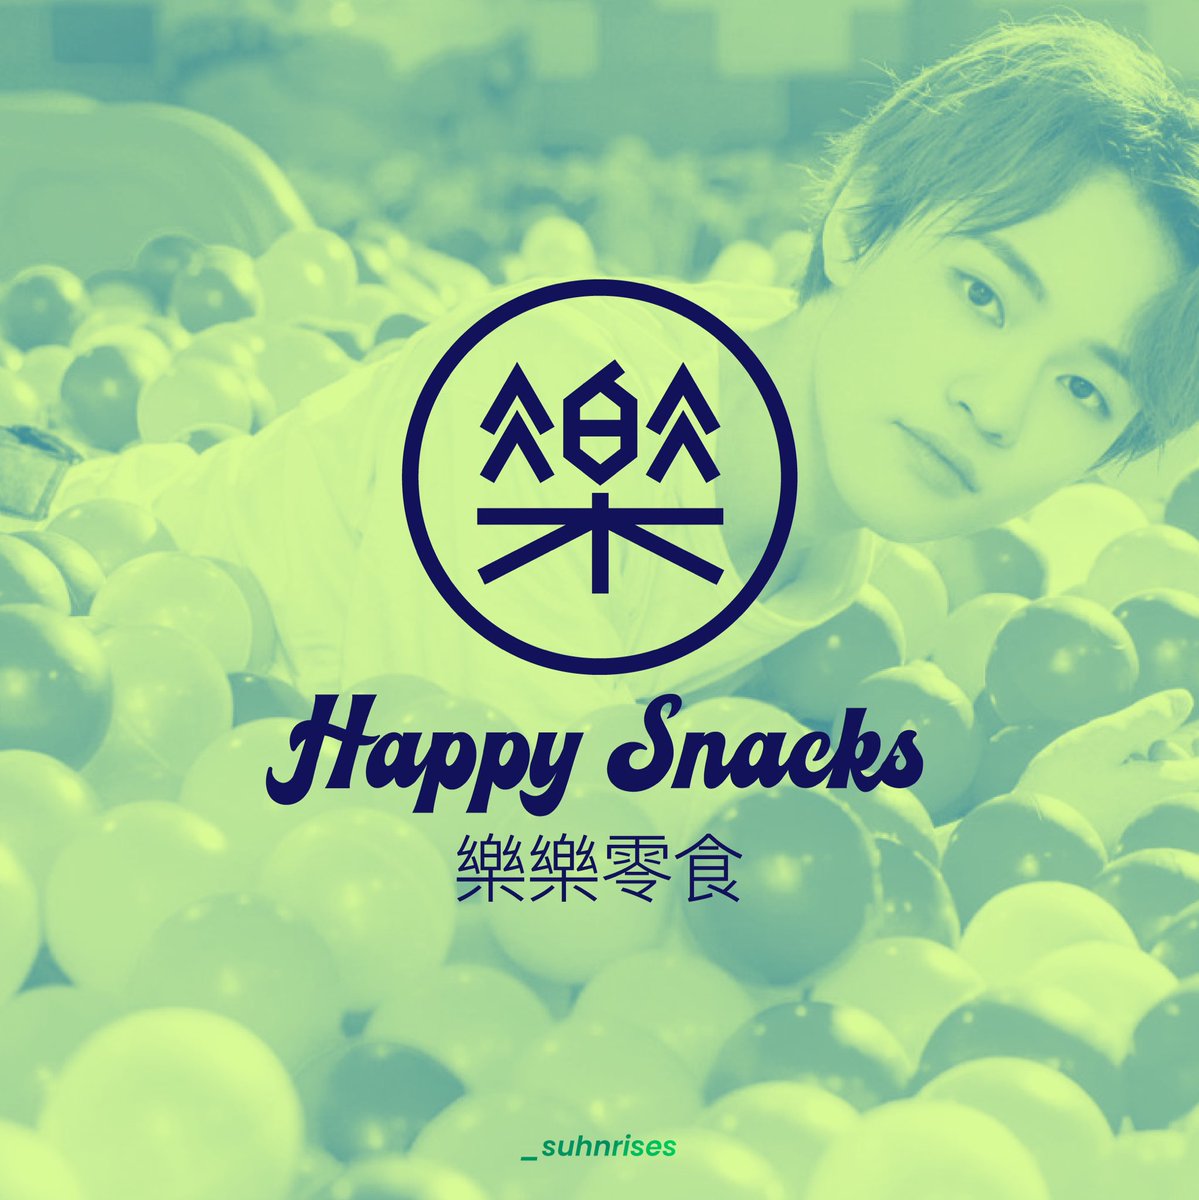 chenle: happy snacks (樂樂零食)- snacks/confectionery brand - inspired by the “樂” in chenle’s name (which means happy in chinese)- makes everyone’s fav childhood snacks like the ones that bring back memories and nostalgia mmmm